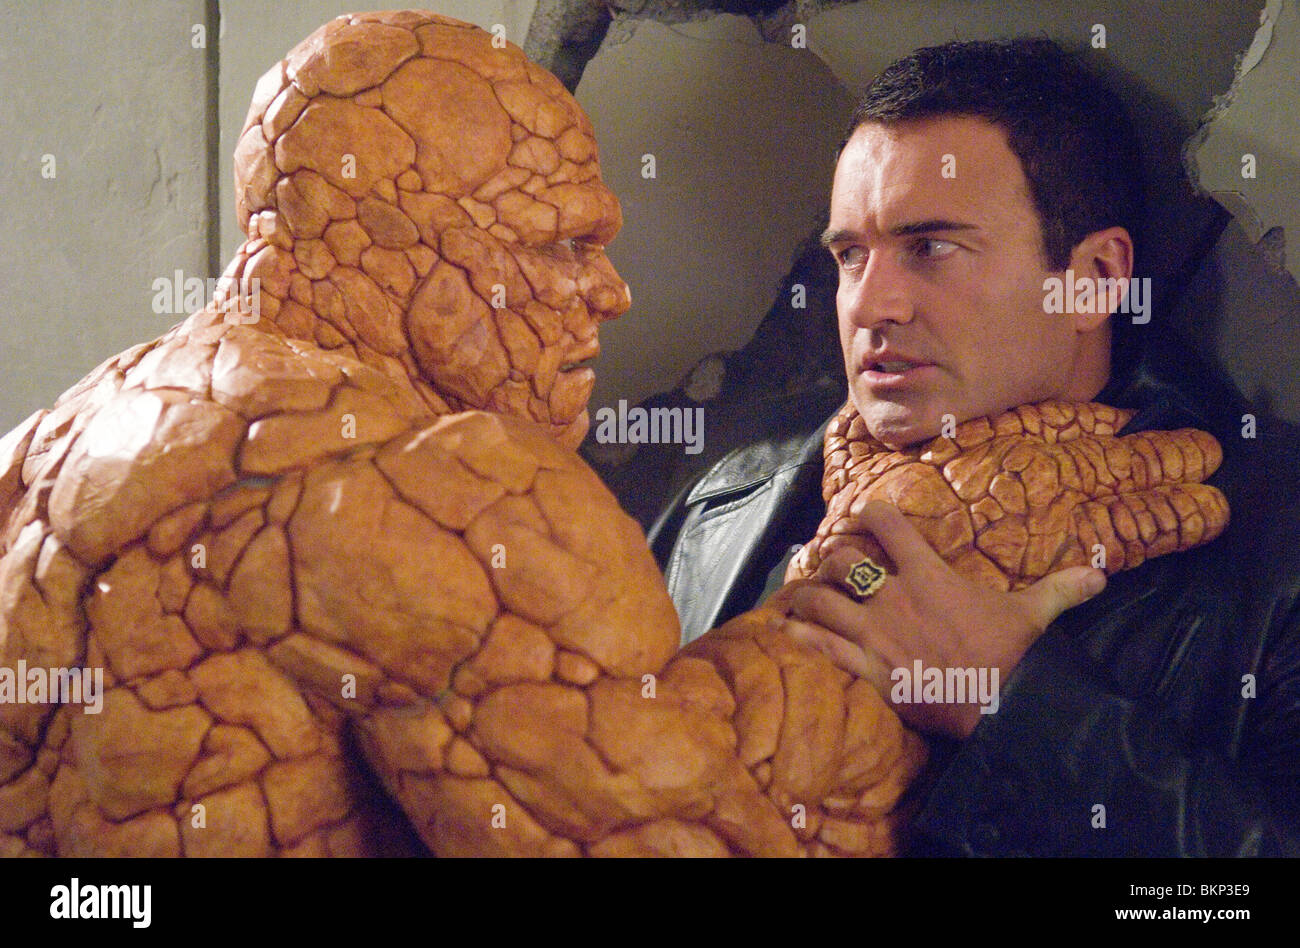 FANTASTIC FOUR: RISE OF THE SILVER SURFER (2007) 4: RISE OF THE SILVER SURFER (ALT) MICHAEL CHIKLIS, JULIAN MCMAHON FFSS 001-05 Stock Photo